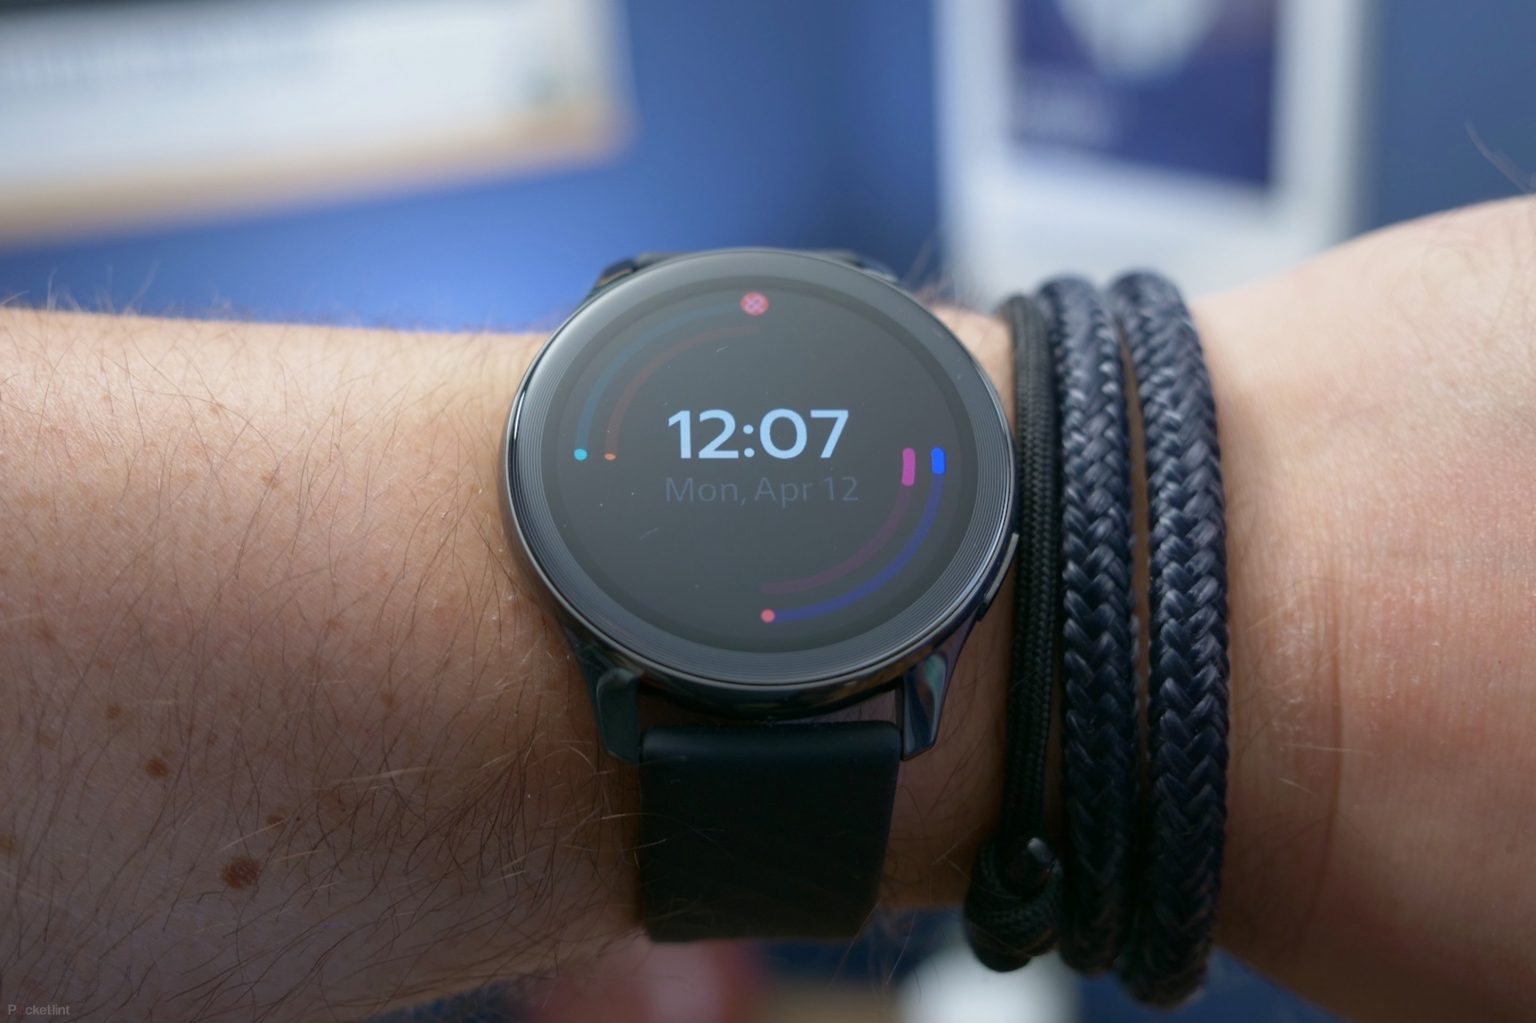 156499 Smartwatches Review Hands On Webstory Image1 Hdqi61ugal